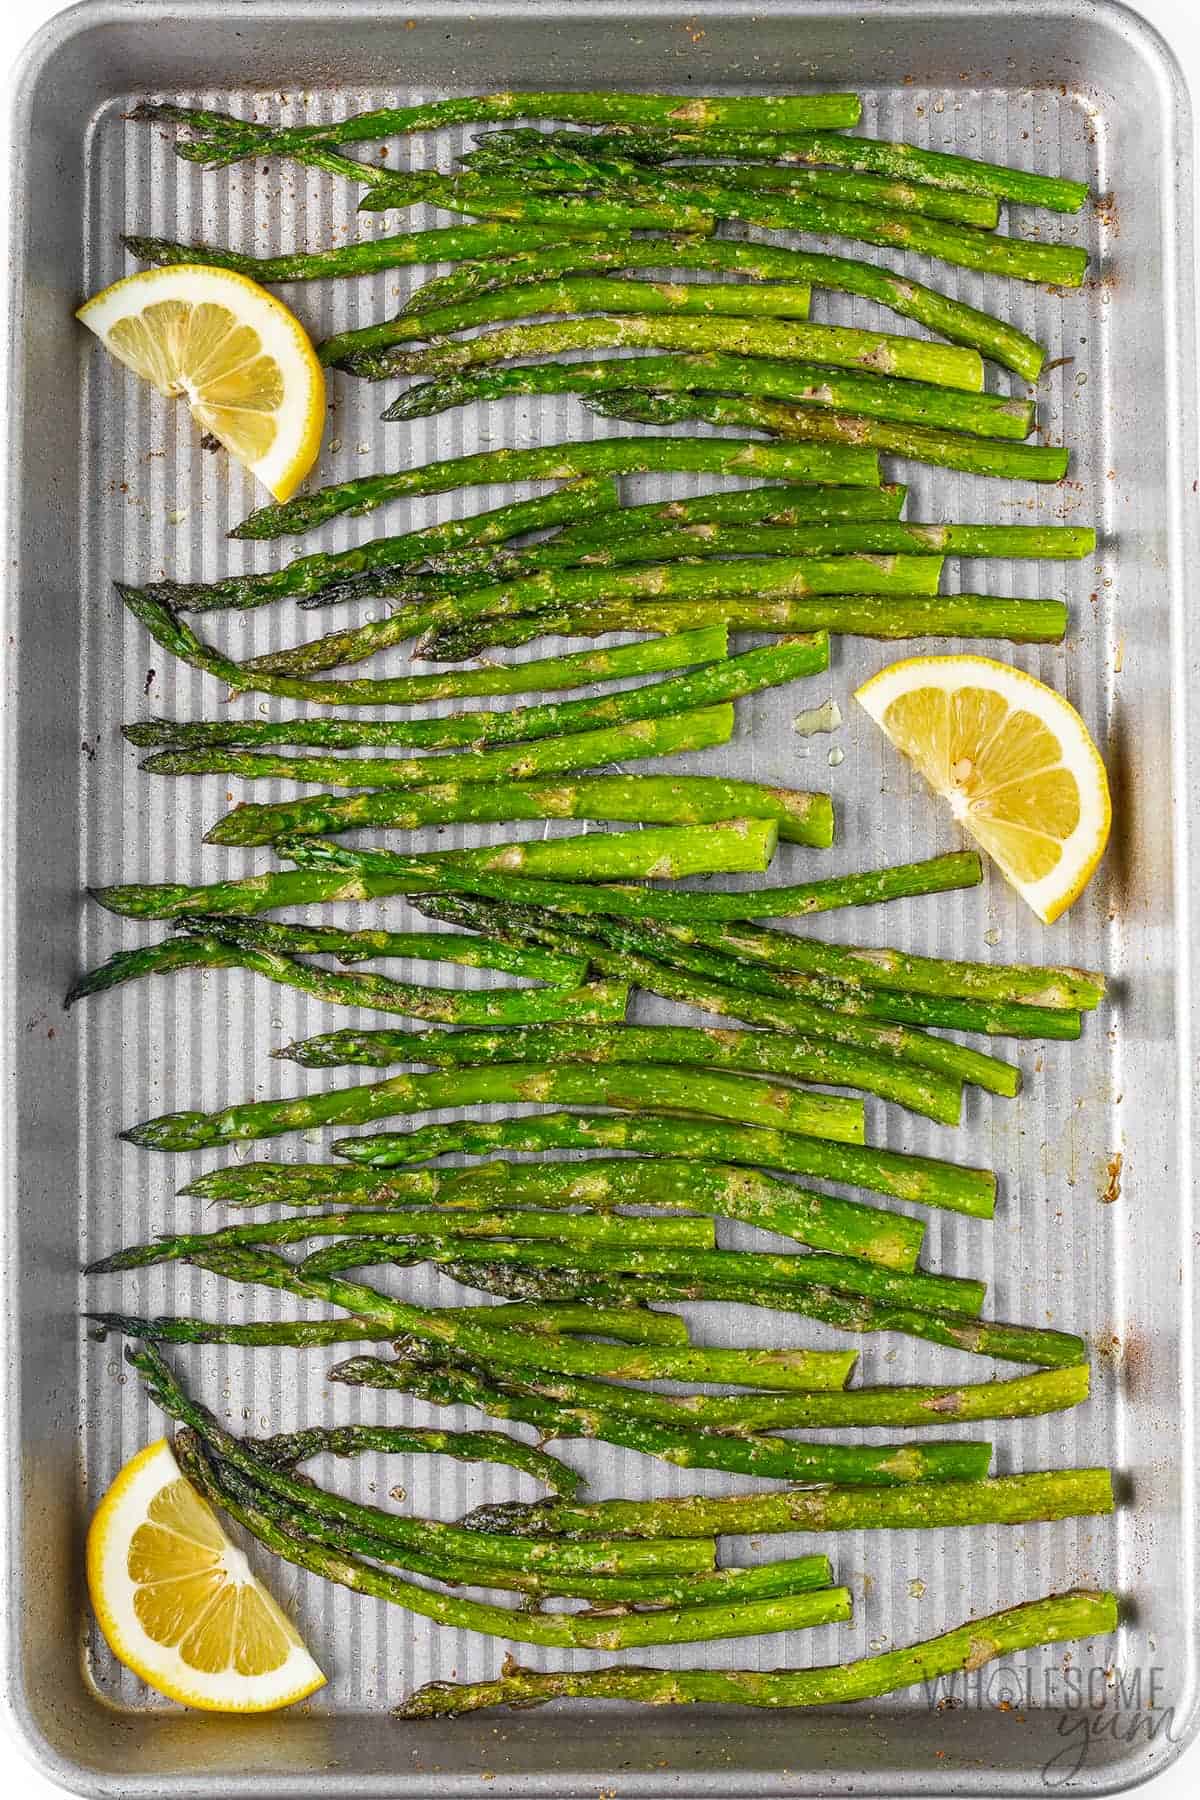 How to cook asparagus in the oven - shown after roasting.